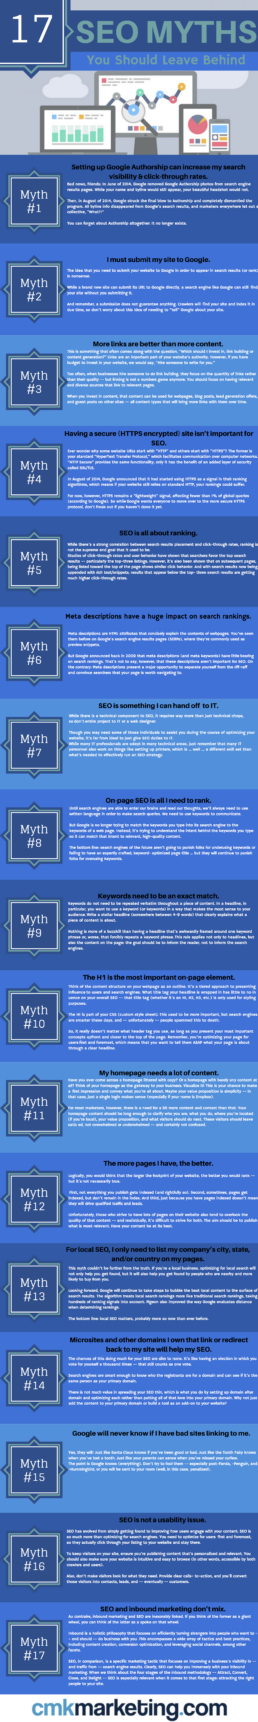 Stop Believing These SEO Myths - Like, Yesterday | SEO Best Practices